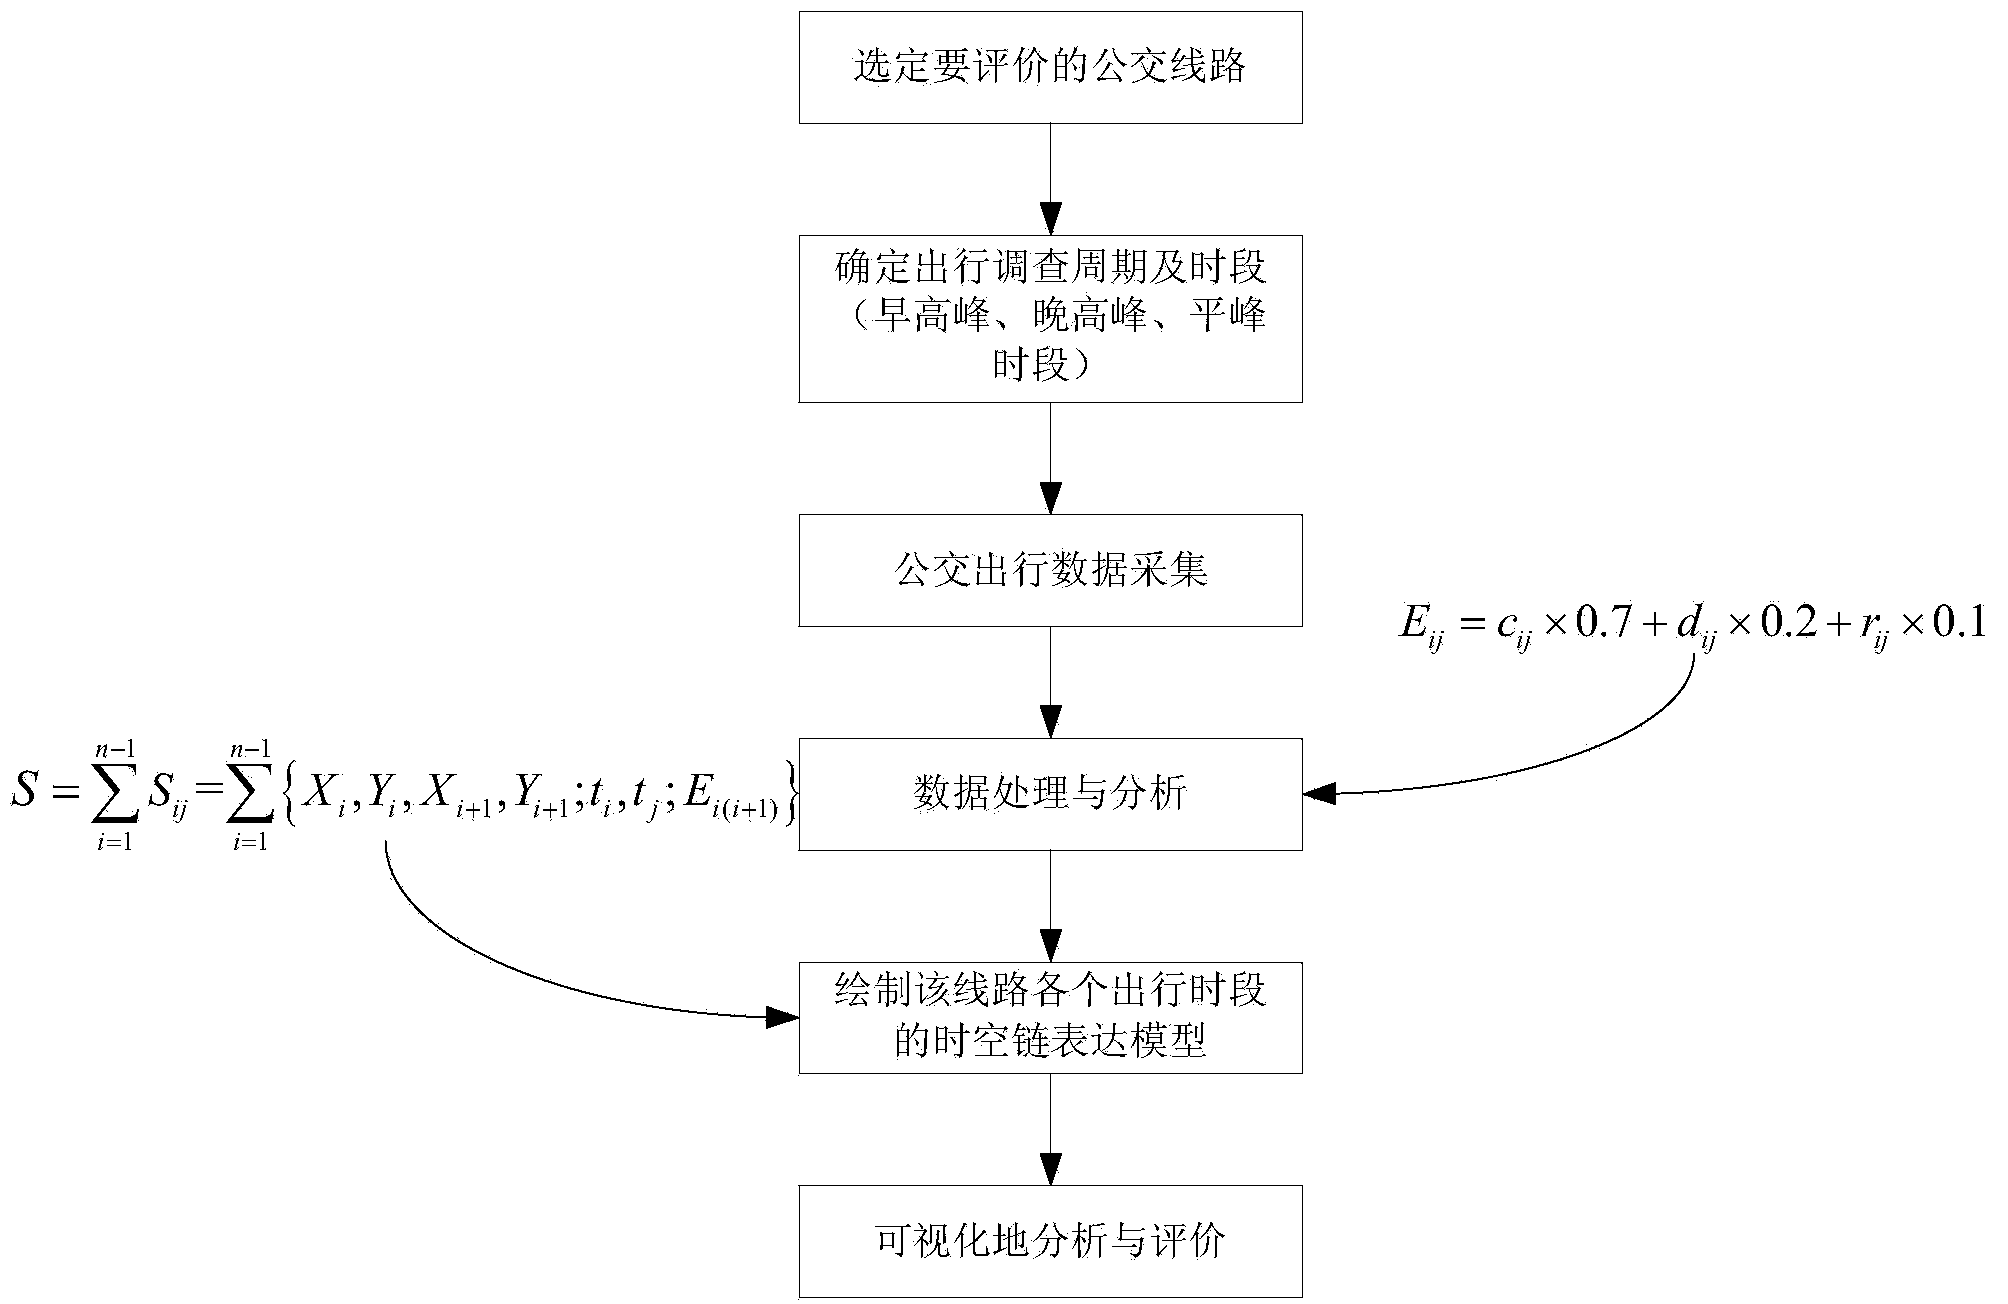 Space-time chain model based bus route evaluation method